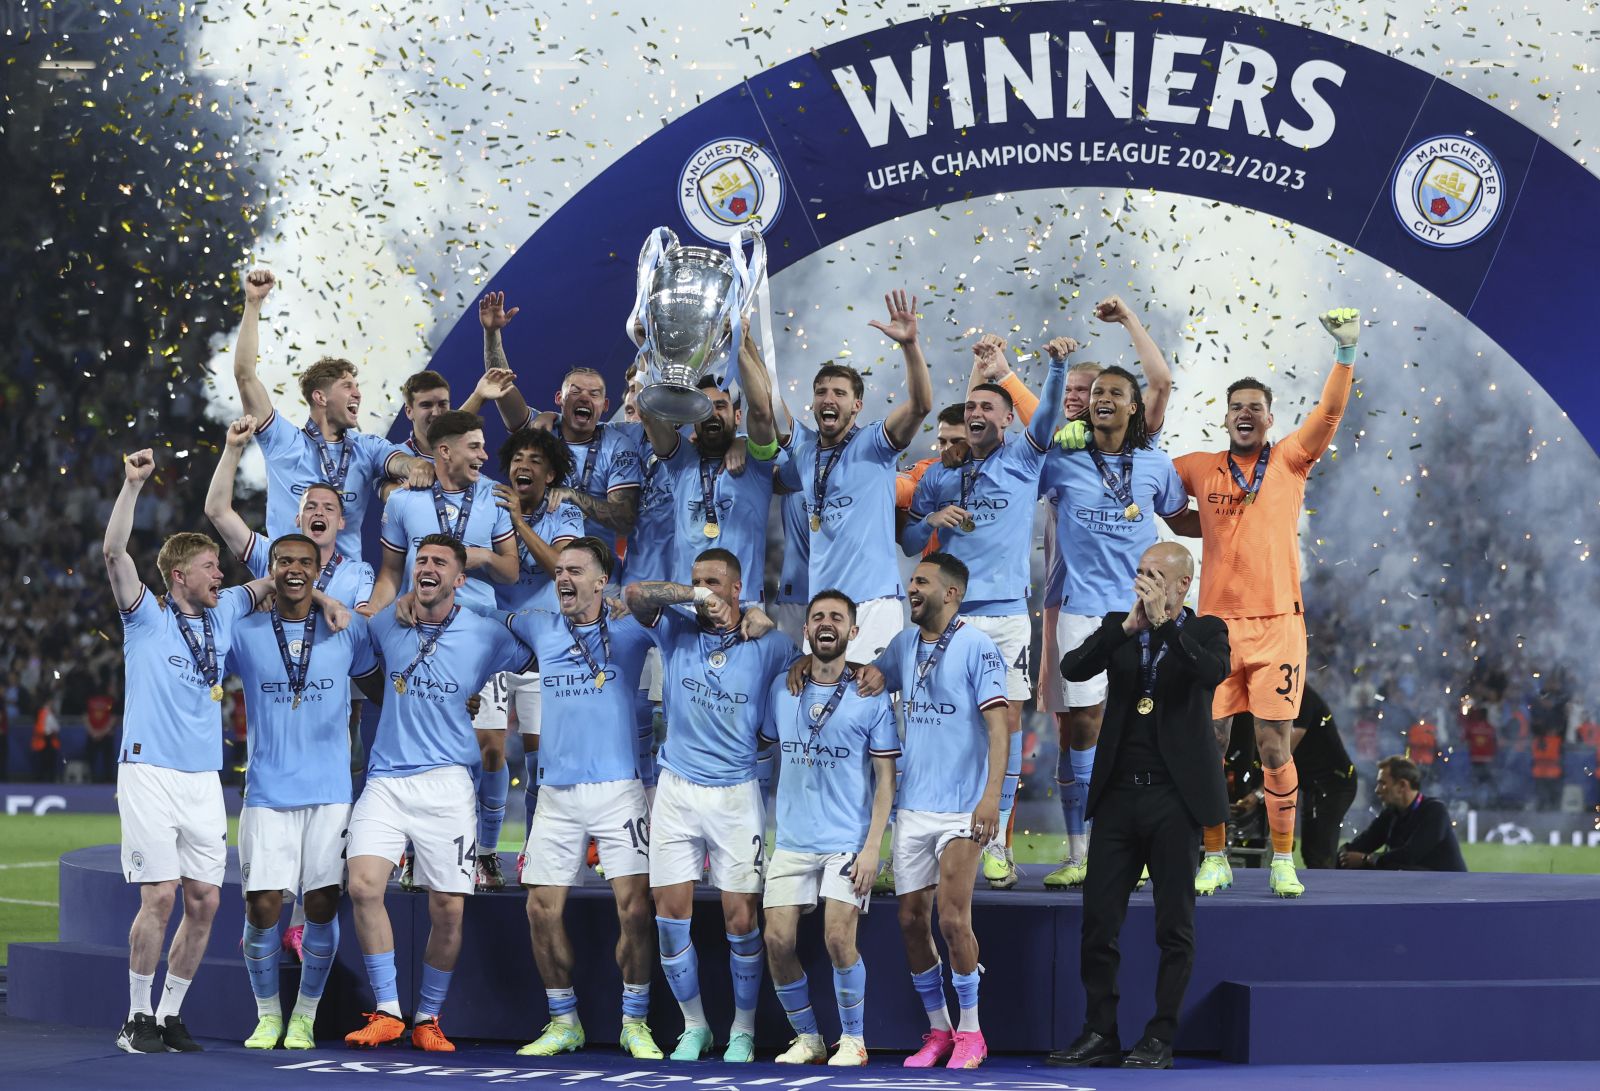 June 10, 2023, Istanbul: Istanbul, Turkey, 10th June 2023. Ilkay Gundogan of Manchester City lifts the trophy after the UEFA Champions League Final match at the Ataturk Olympic Stadium, Istanbul. (Credit Image: Â© Paul Terry/Sportimage/Cal Sport Media) (Cal Sport Media via AP Images)